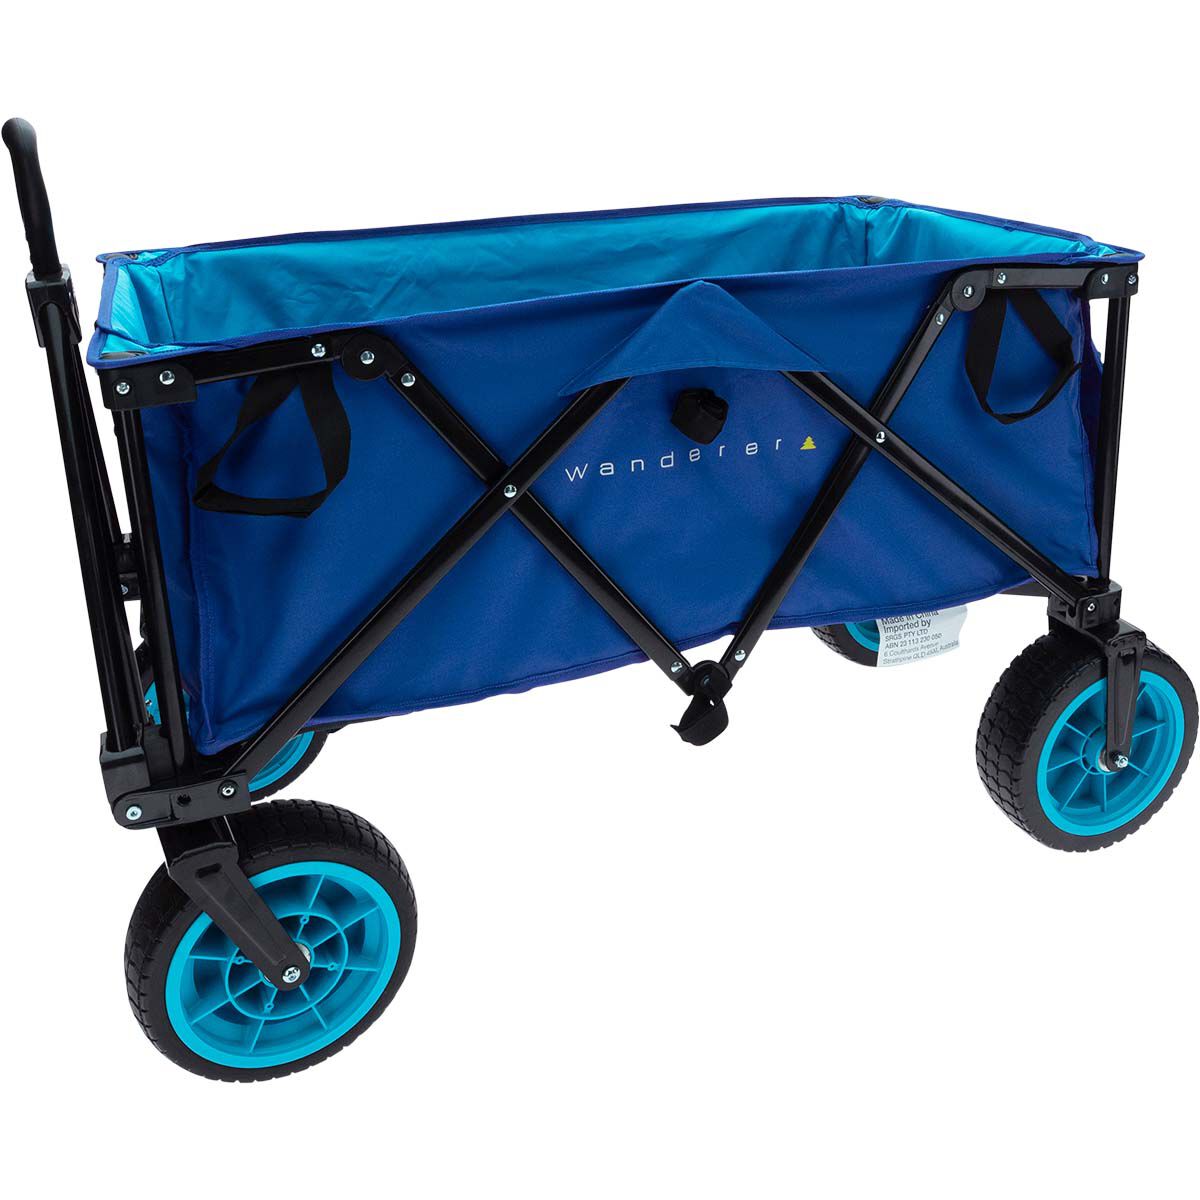 Collapsible Sturdy Steel Frame Garden Camping Wagon Cart Blue Dicembre Colori Heavy Duty Folding Wagon Beach Utility Cart 